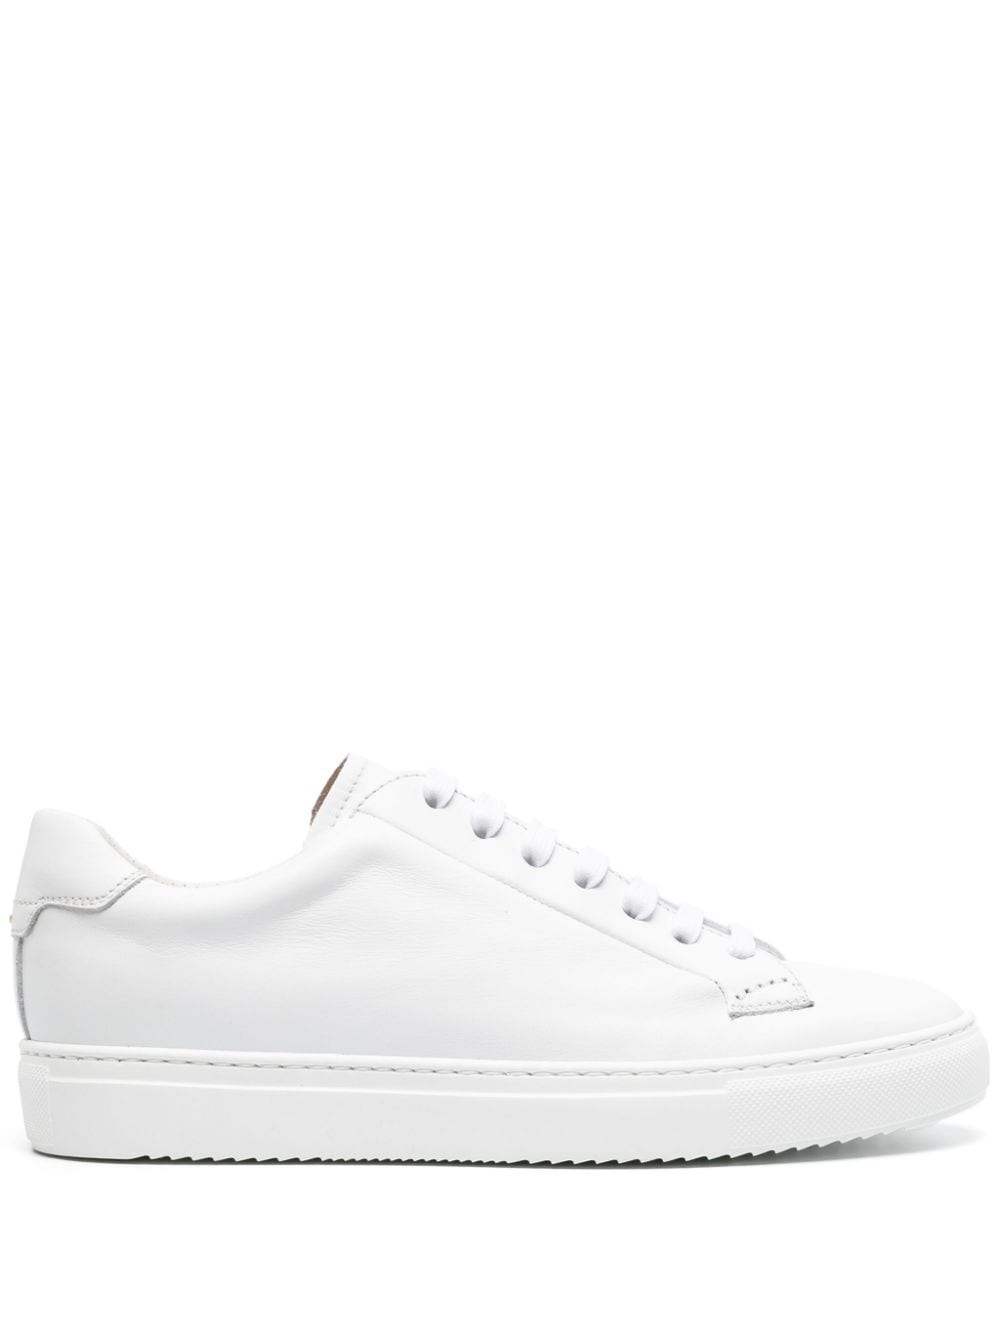 Doucal's lace-up leather sneakers - White von Doucal's